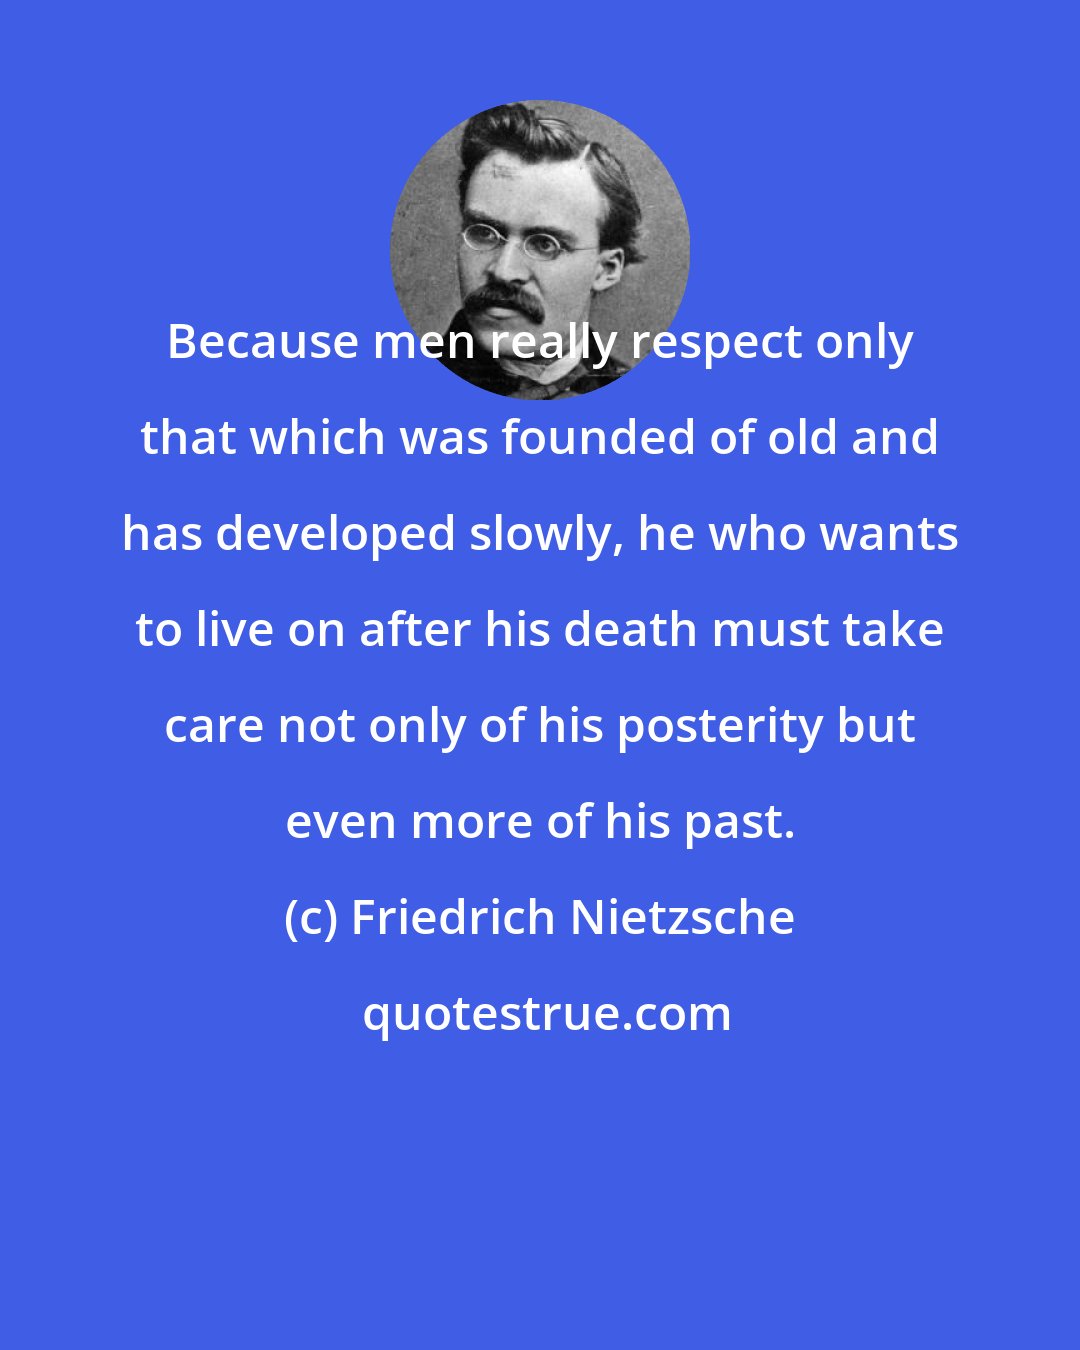 Friedrich Nietzsche: Because men really respect only that which was founded of old and has developed slowly, he who wants to live on after his death must take care not only of his posterity but even more of his past.